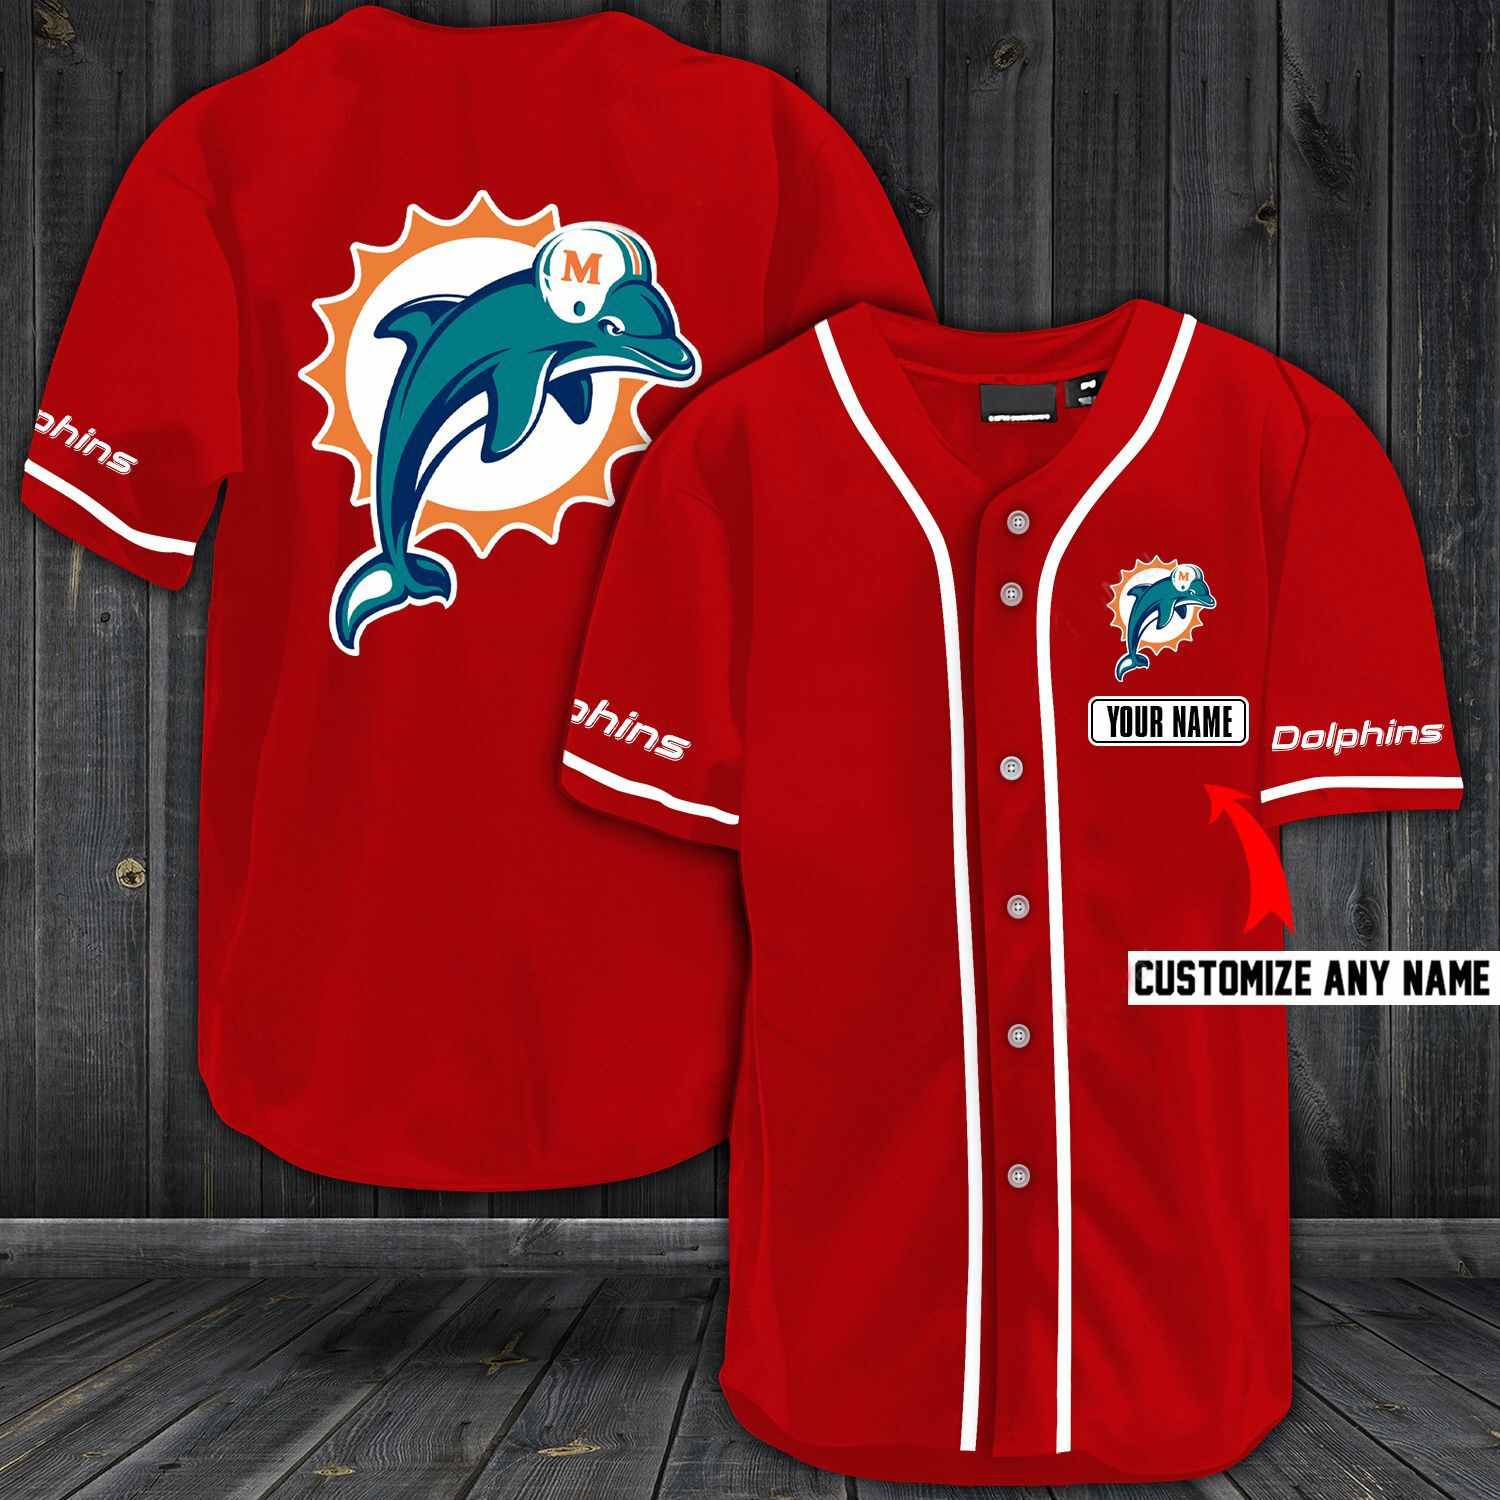 Miami Dolphins NFL Baseball Red Custom Name And Number Jerseys Shirts